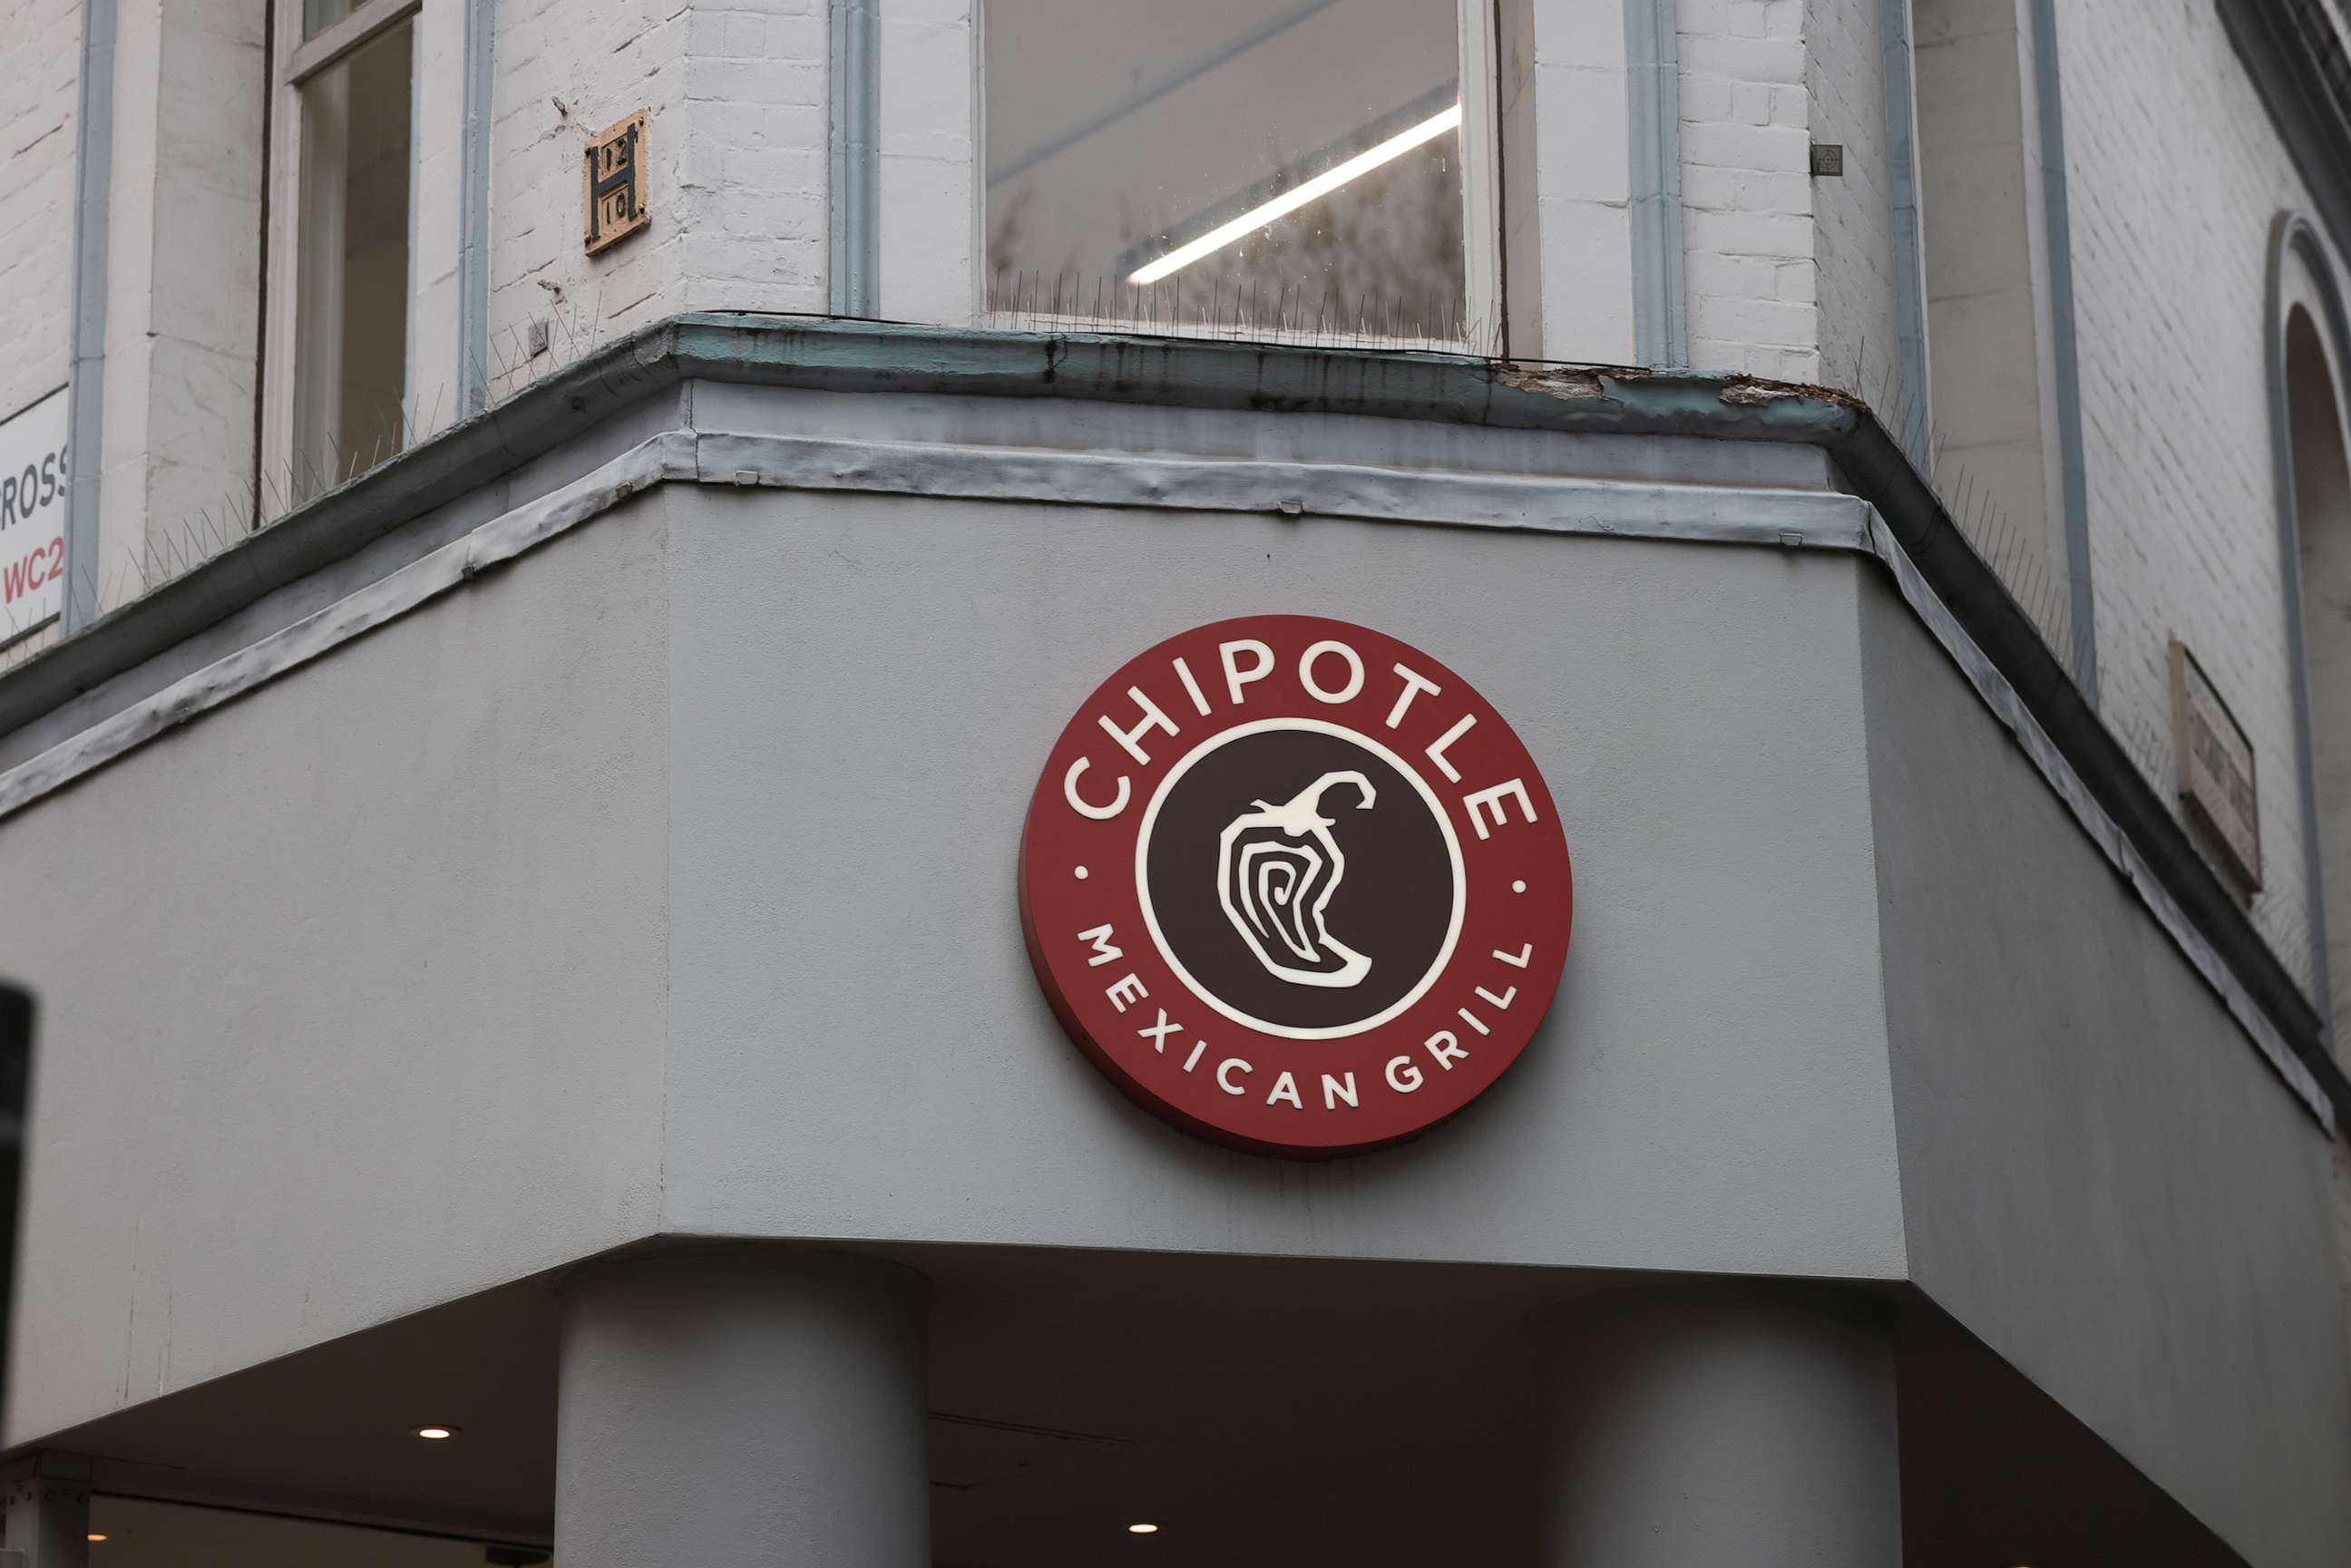 PHOTO: The exterior of a Chipotle Mexican Grill store photographed on Feb. 18, 2023 in London.